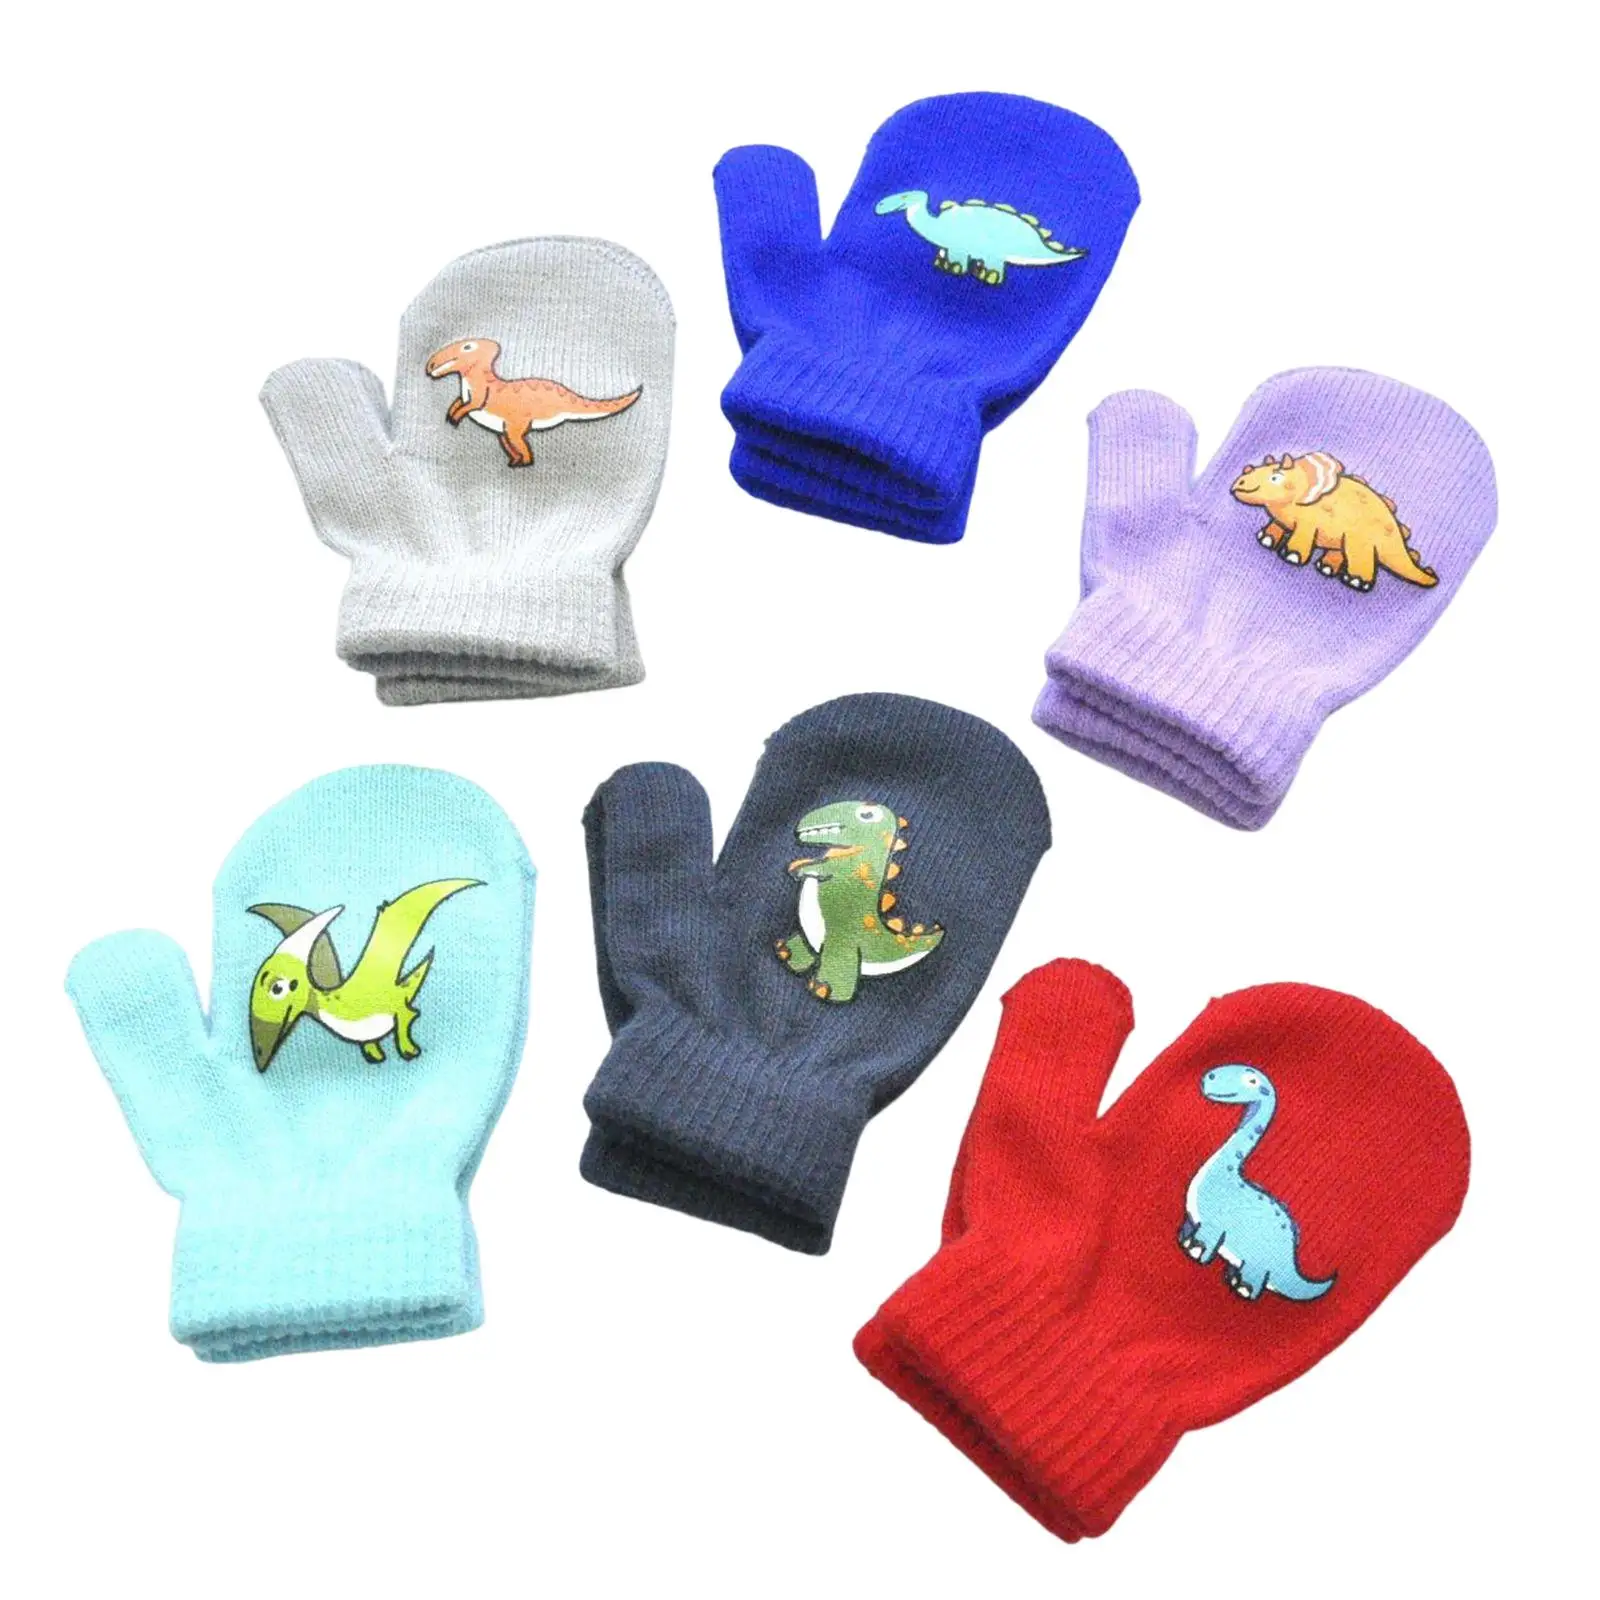 6 Pairs Kids Winter Gloves Stretch Knitted Lightweight Warm Durable Daily Use for Indoor and Outdoor Activities